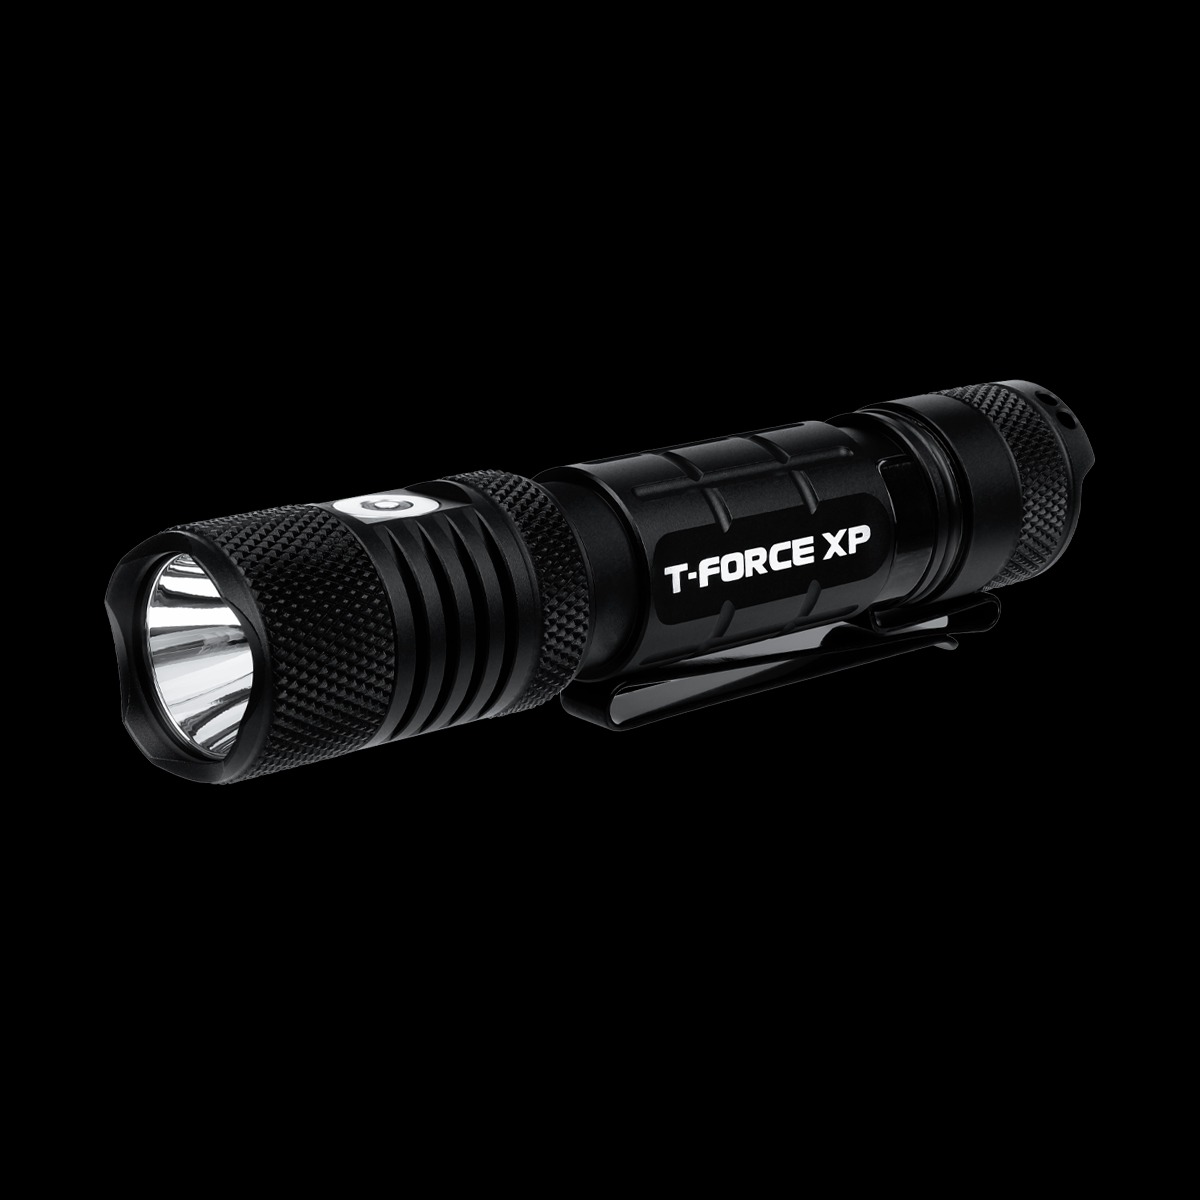 Tactical 2030 lm high-powered handheld flashlight, T-FORCE XP